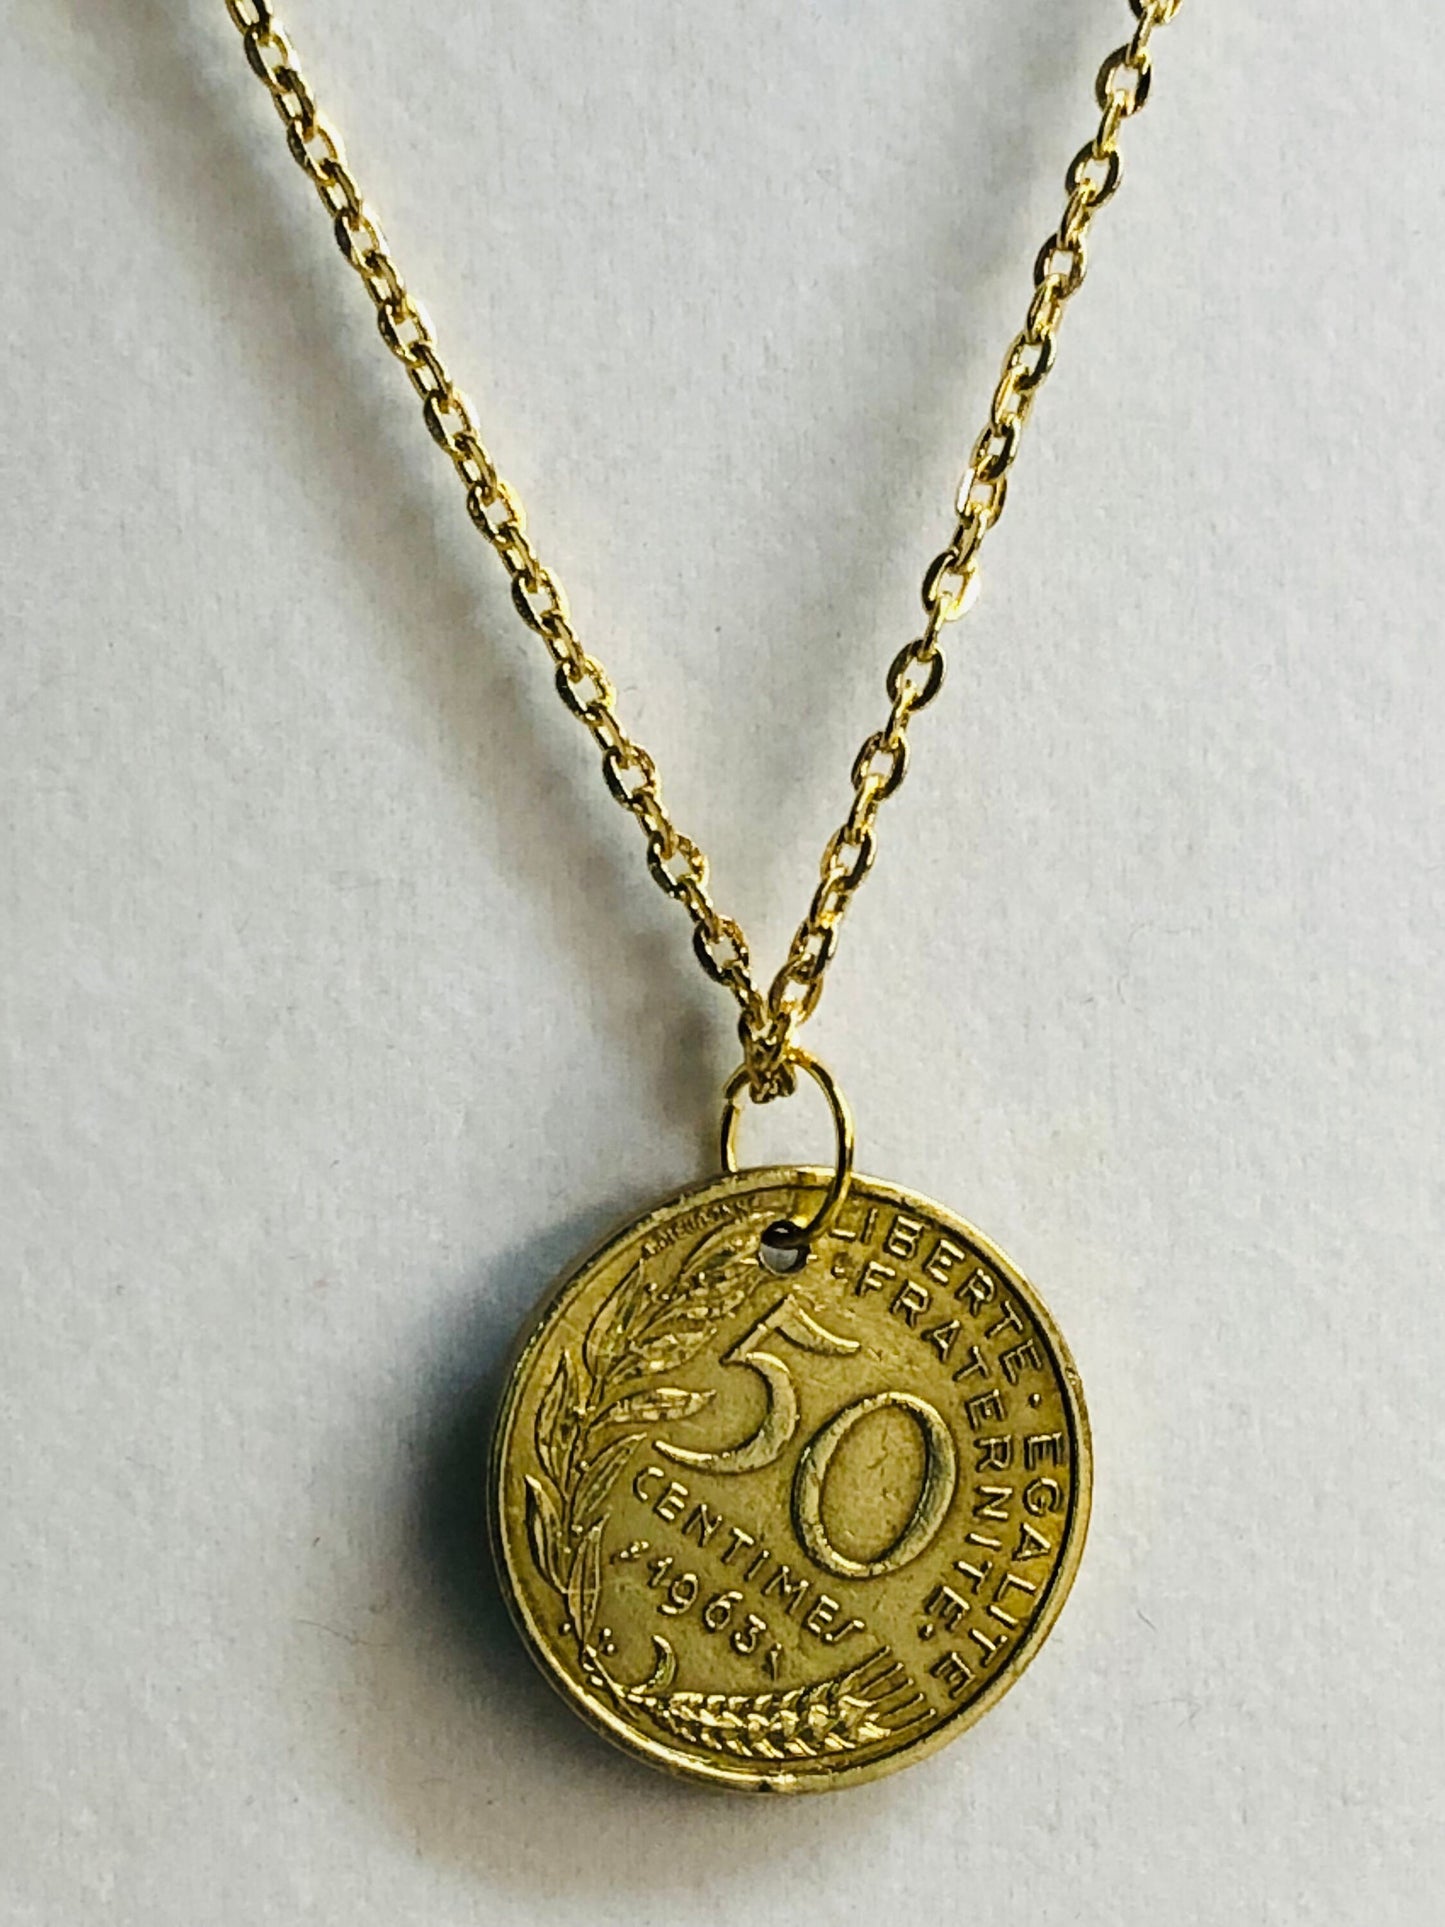 France Coin Pendant French 50 Centimes Personal Necklace Old Vintage Handmade Jewelry Gift Friend Charm For Him Her World Coin Collector